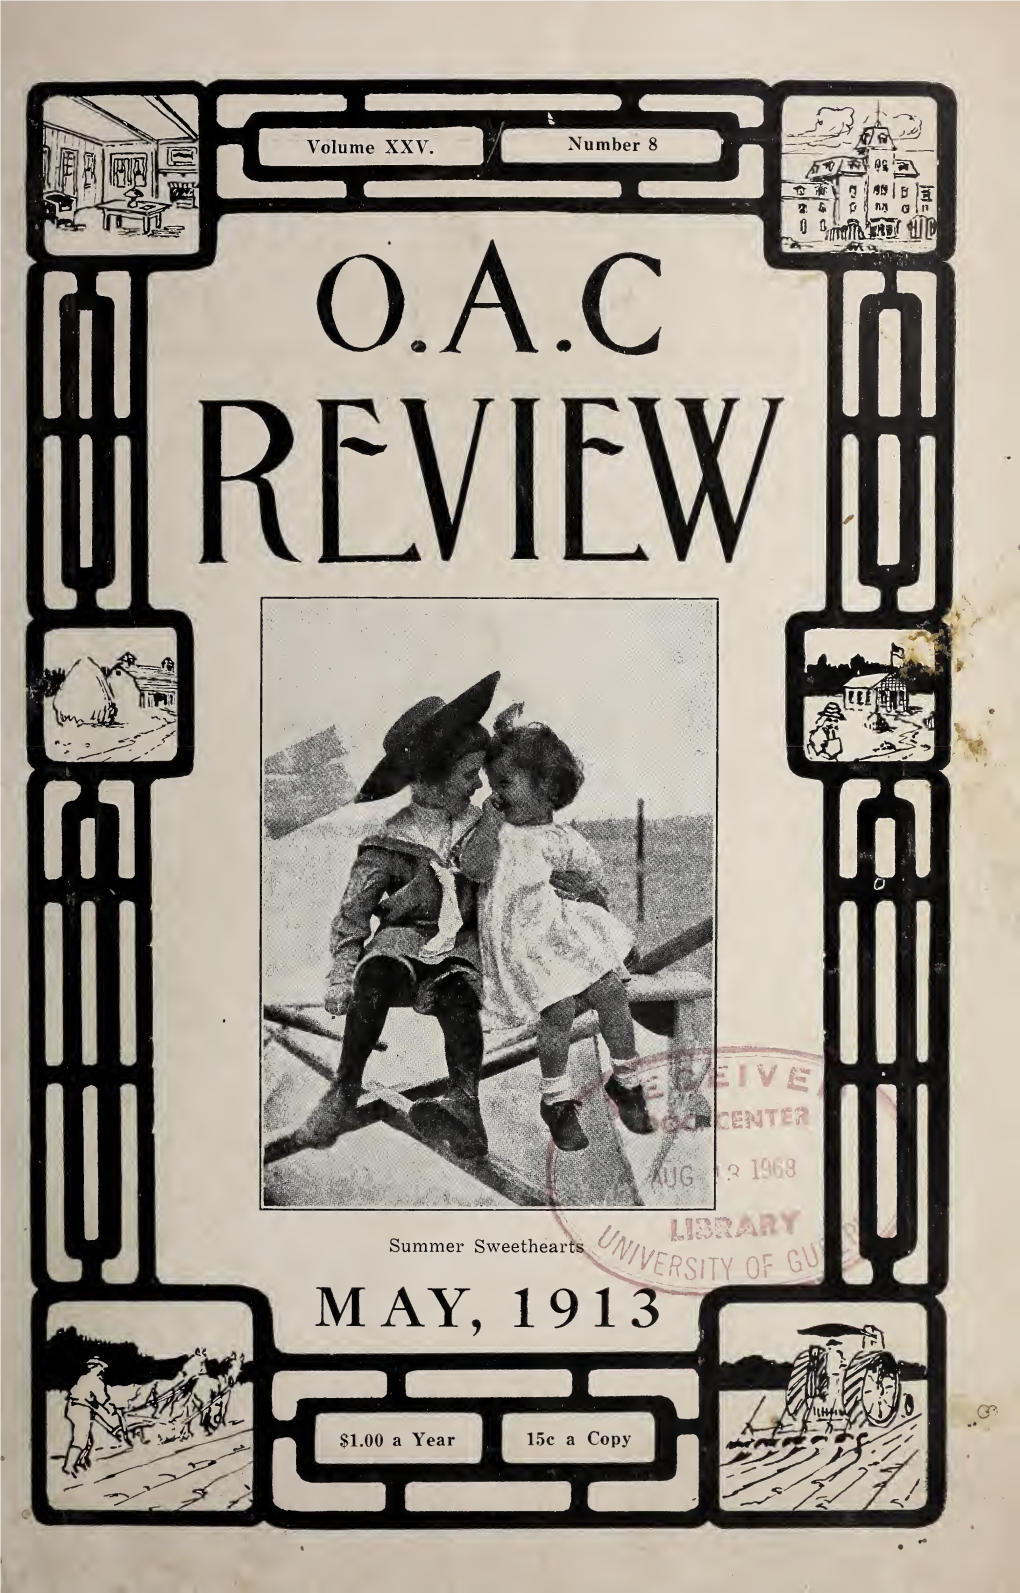 OAC Review Volume 25 Issue 8, May 1913